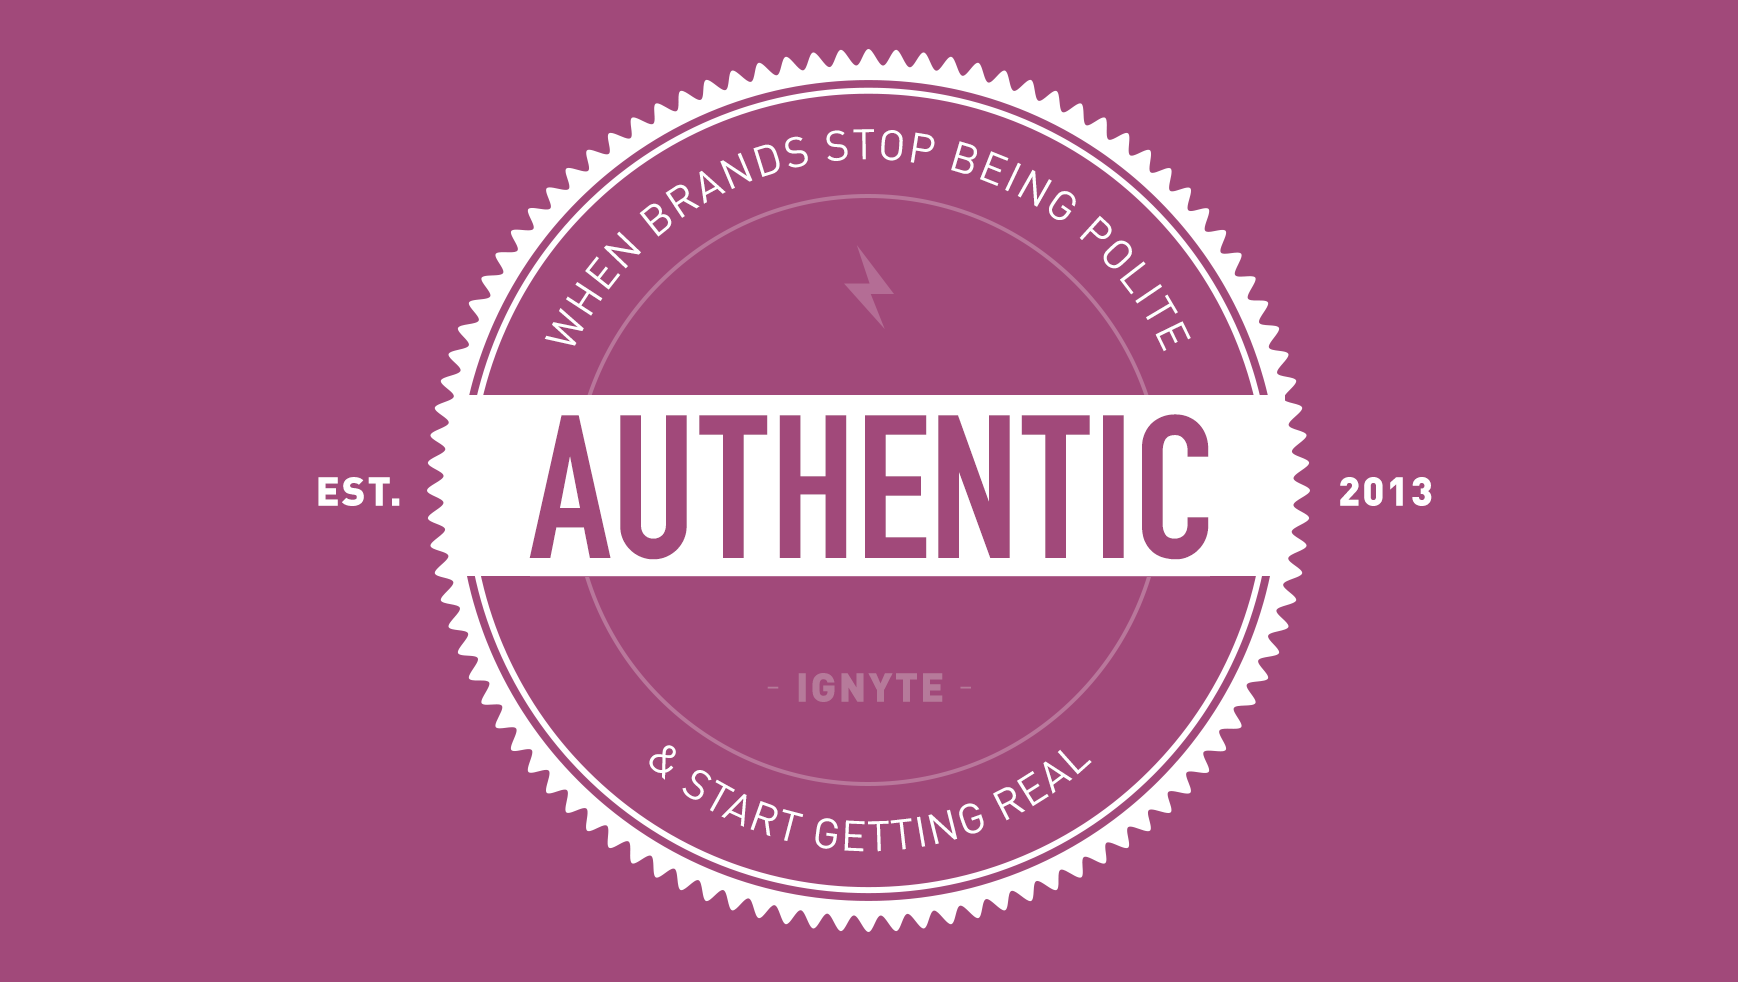 Authenticity: When Brands Stop Being Polite & Start Getting Real